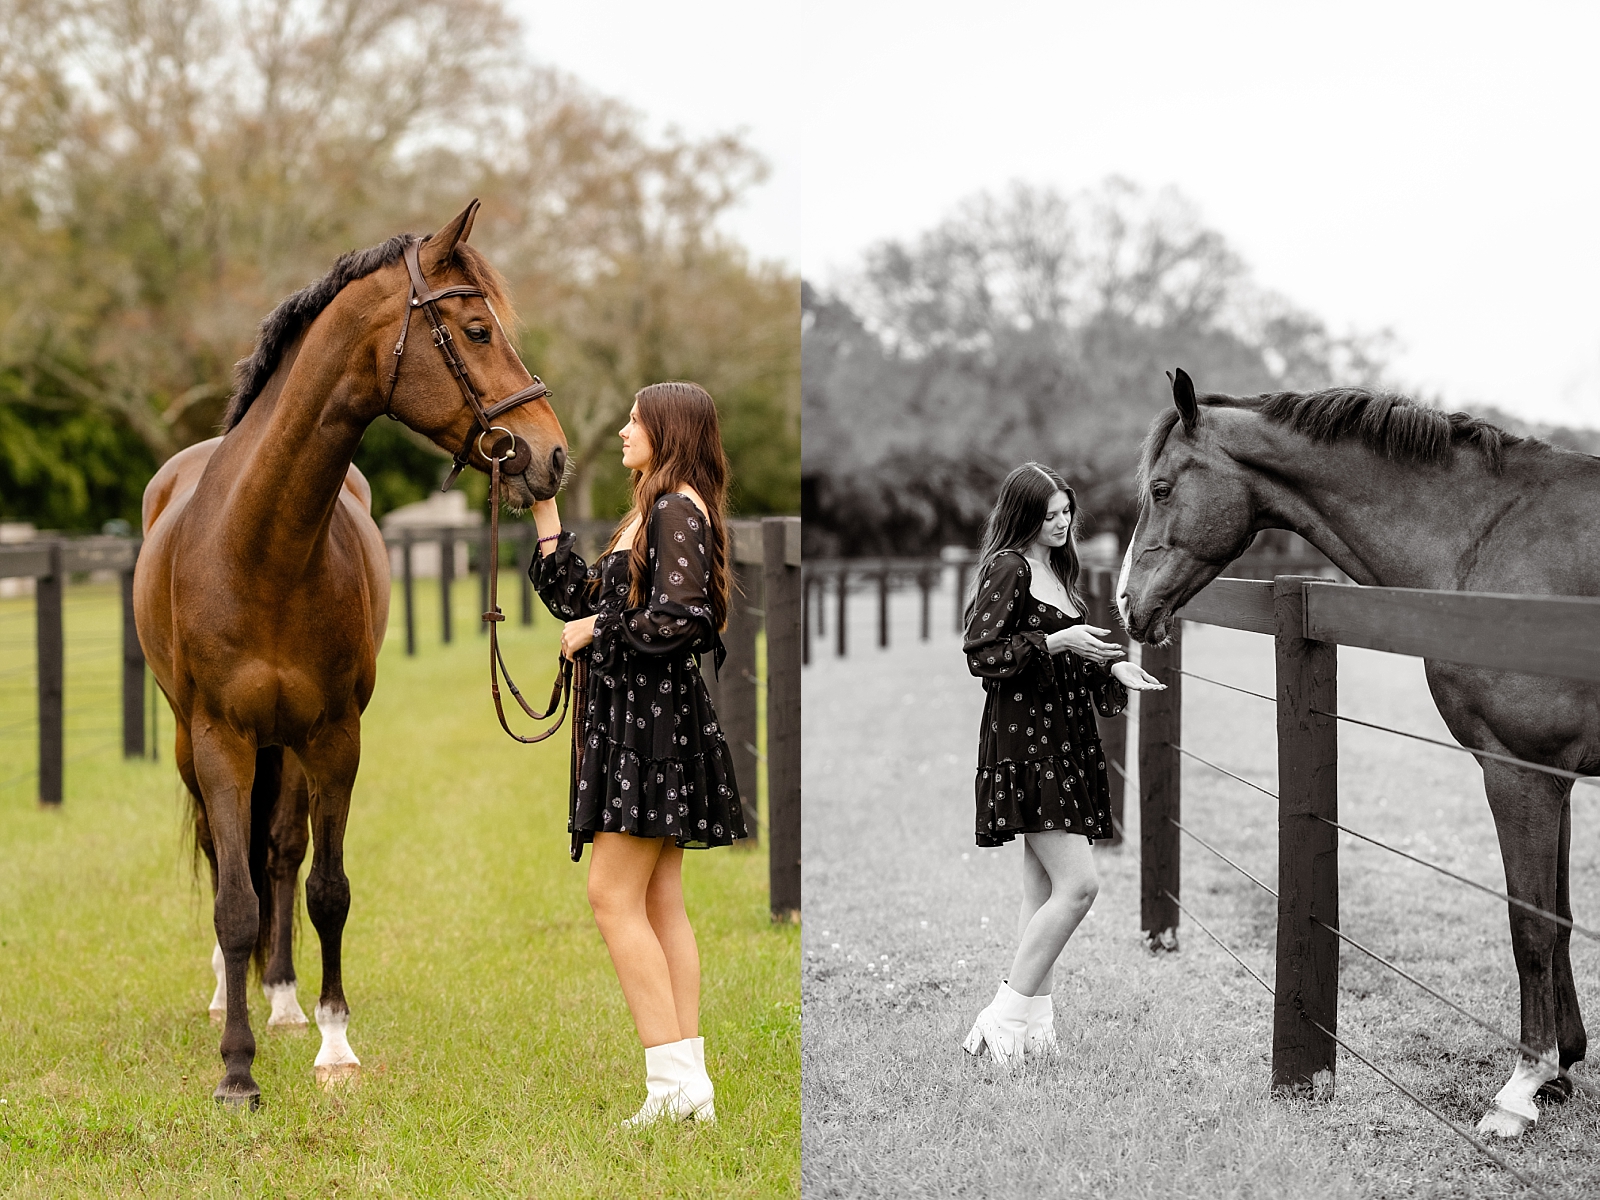 Senior pictures with horses. Ocala equestrian photography. Horse and rider. Jumper horse. Girl with her horse. Horse and rider posing ideas.